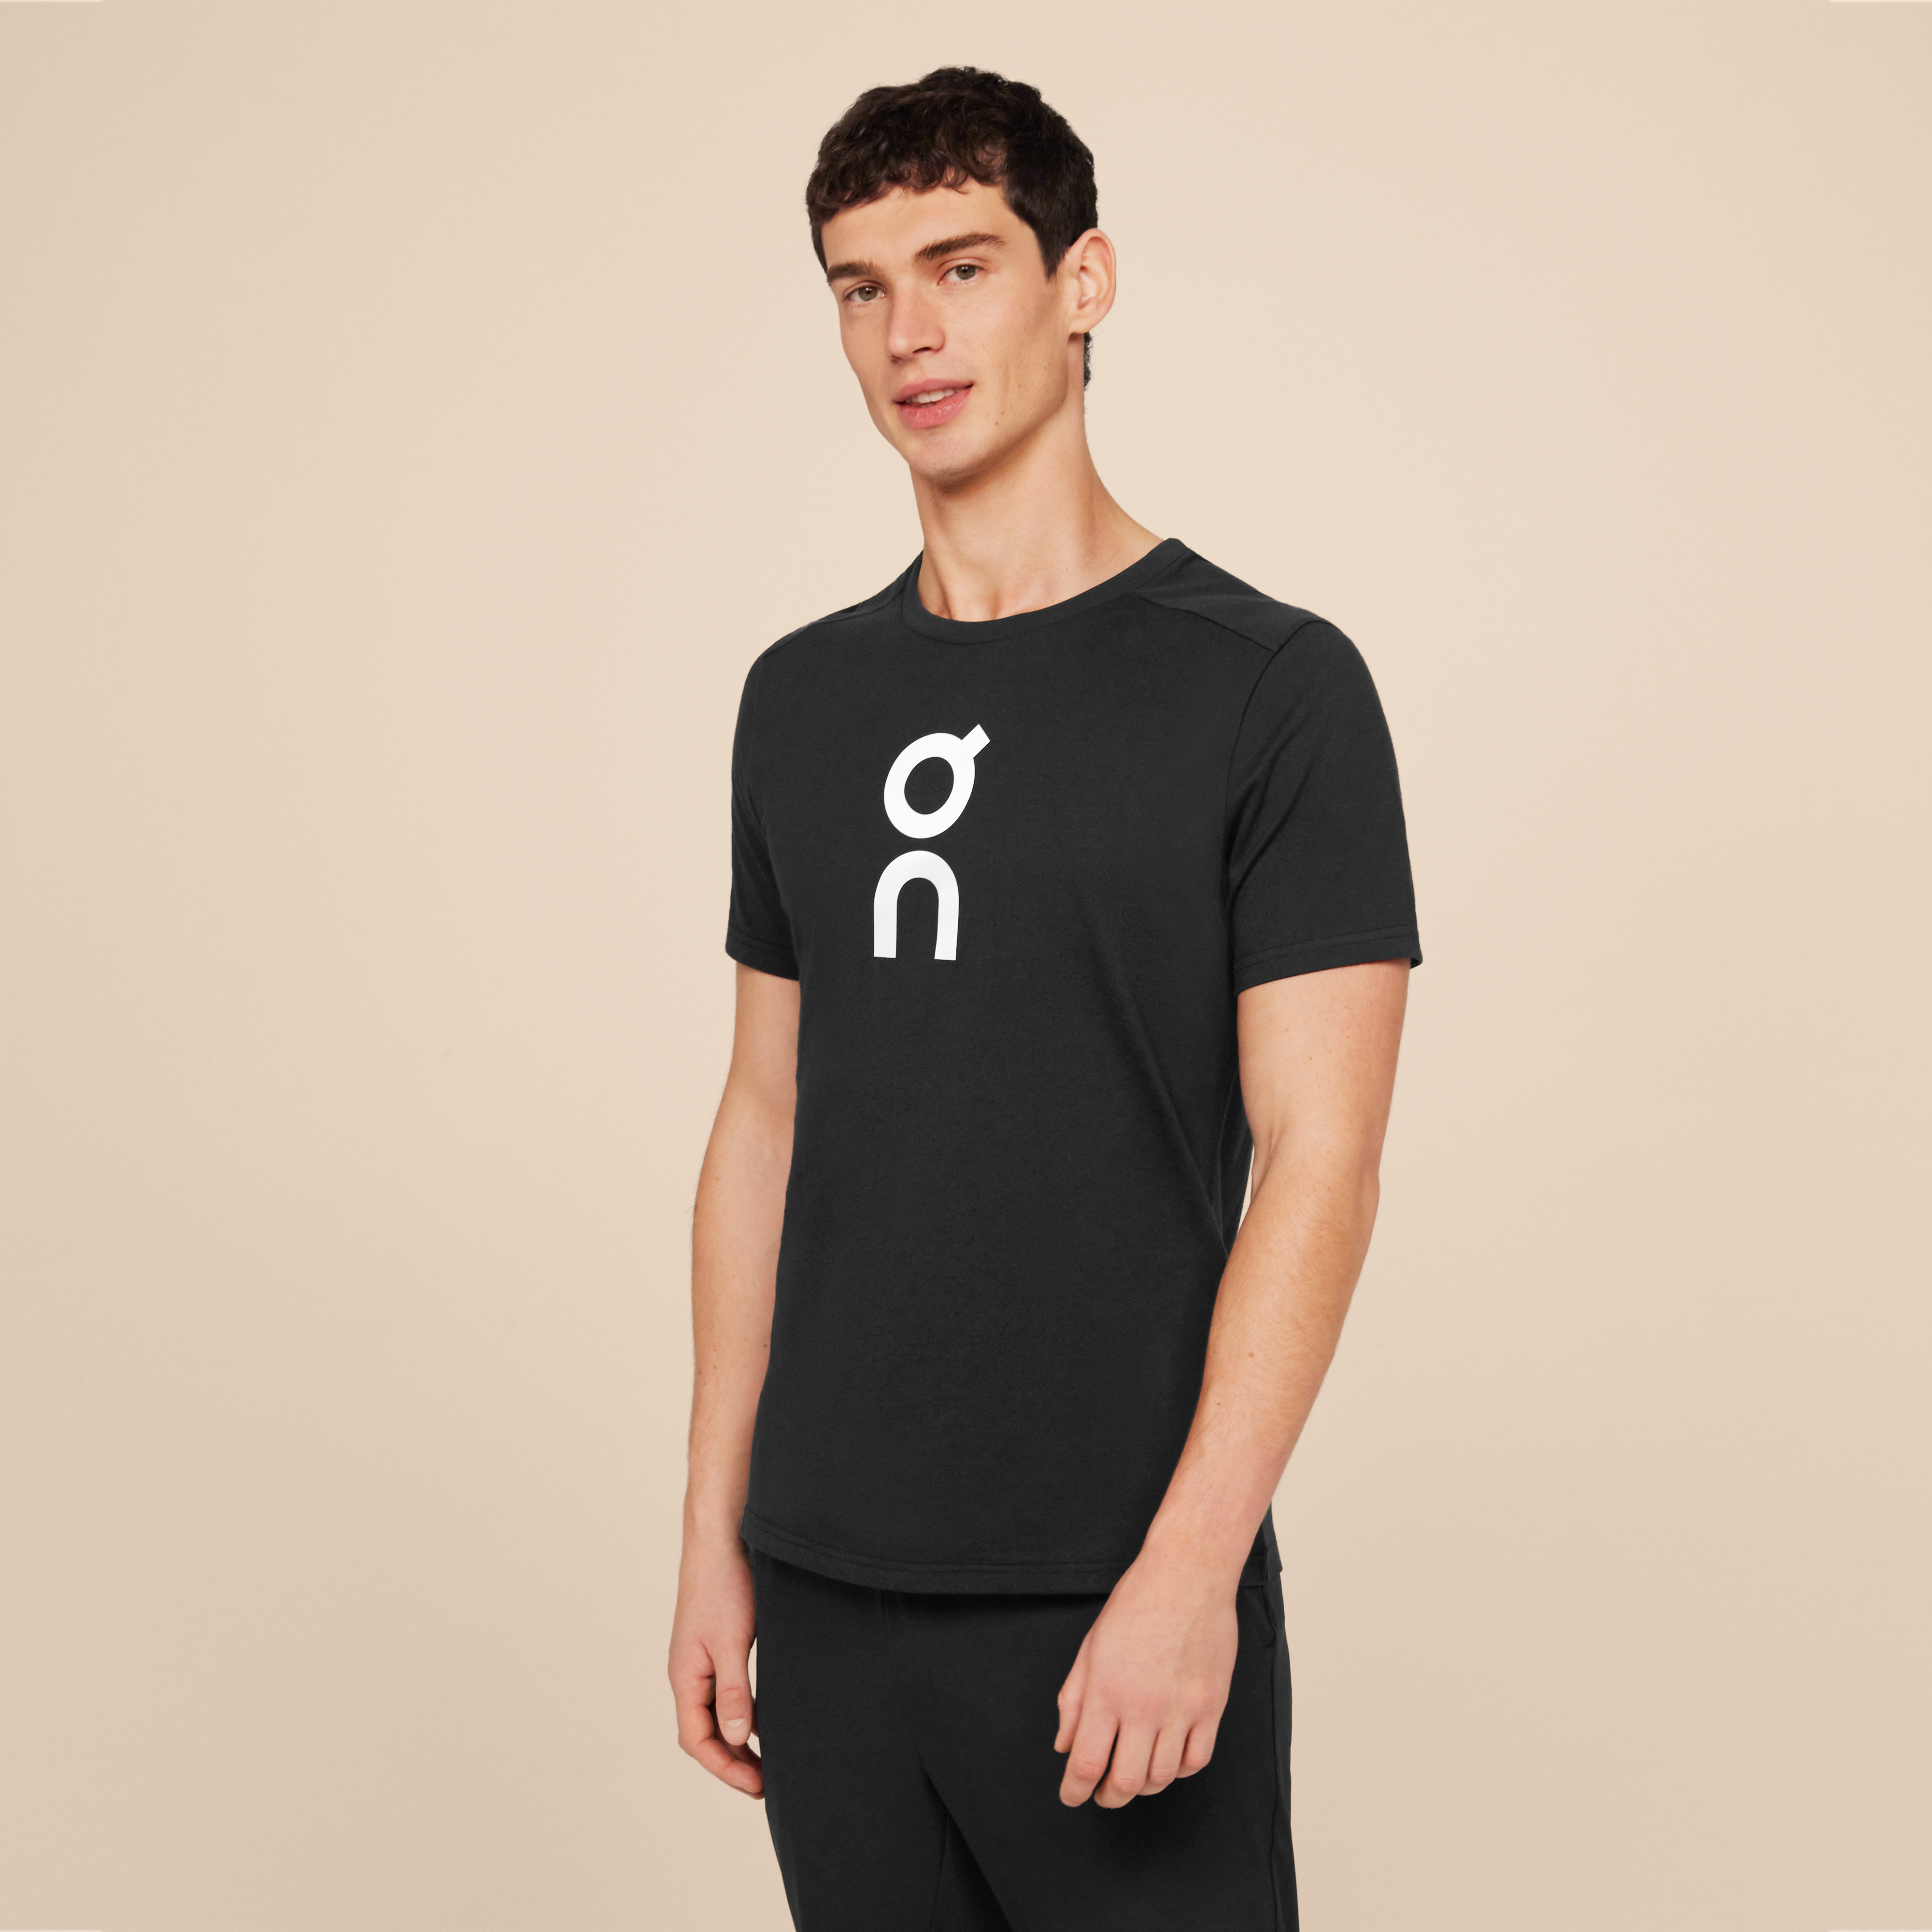 On Graphic-T Black Men All-day, recovery, organic cotton Tops and t-shirts